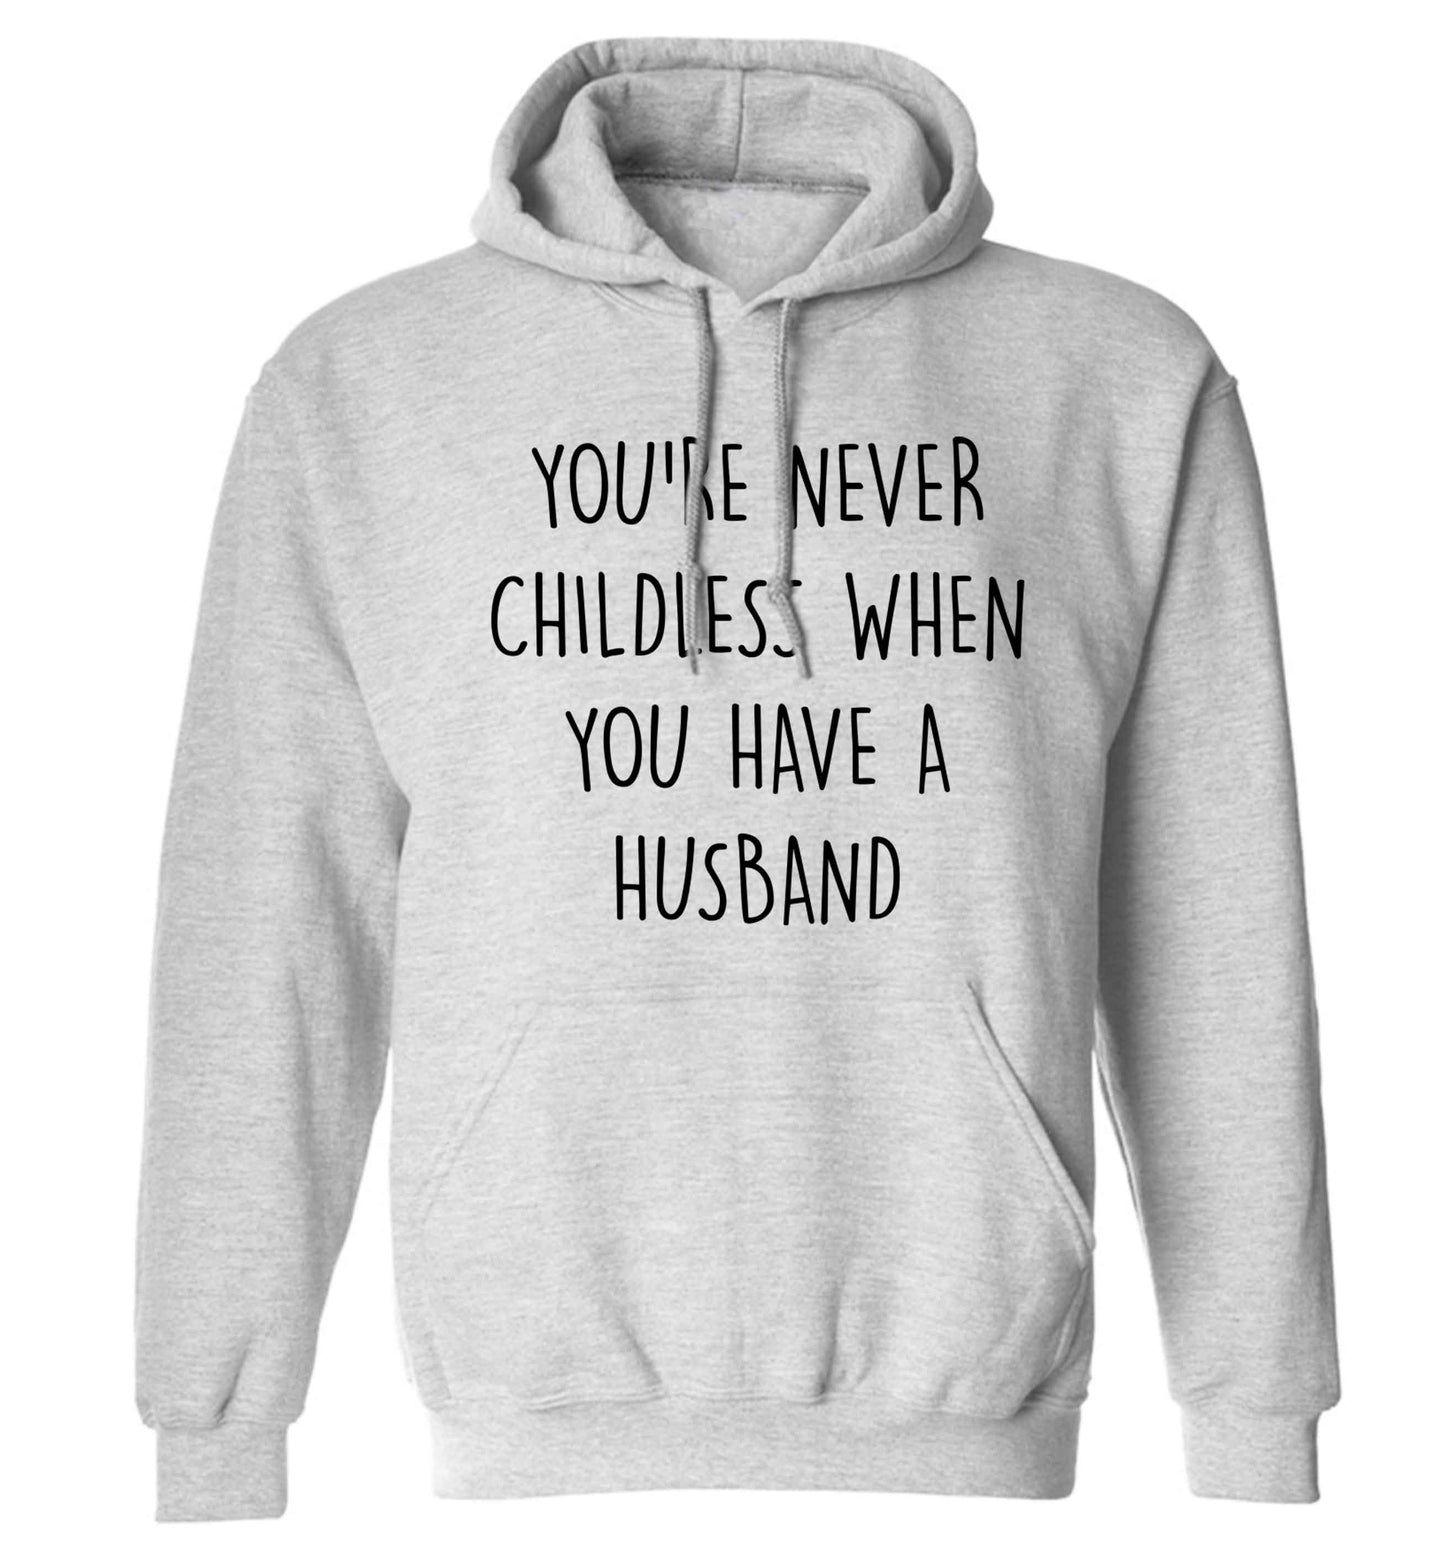 You're never childess when you have a husband adults unisex grey hoodie 2XL